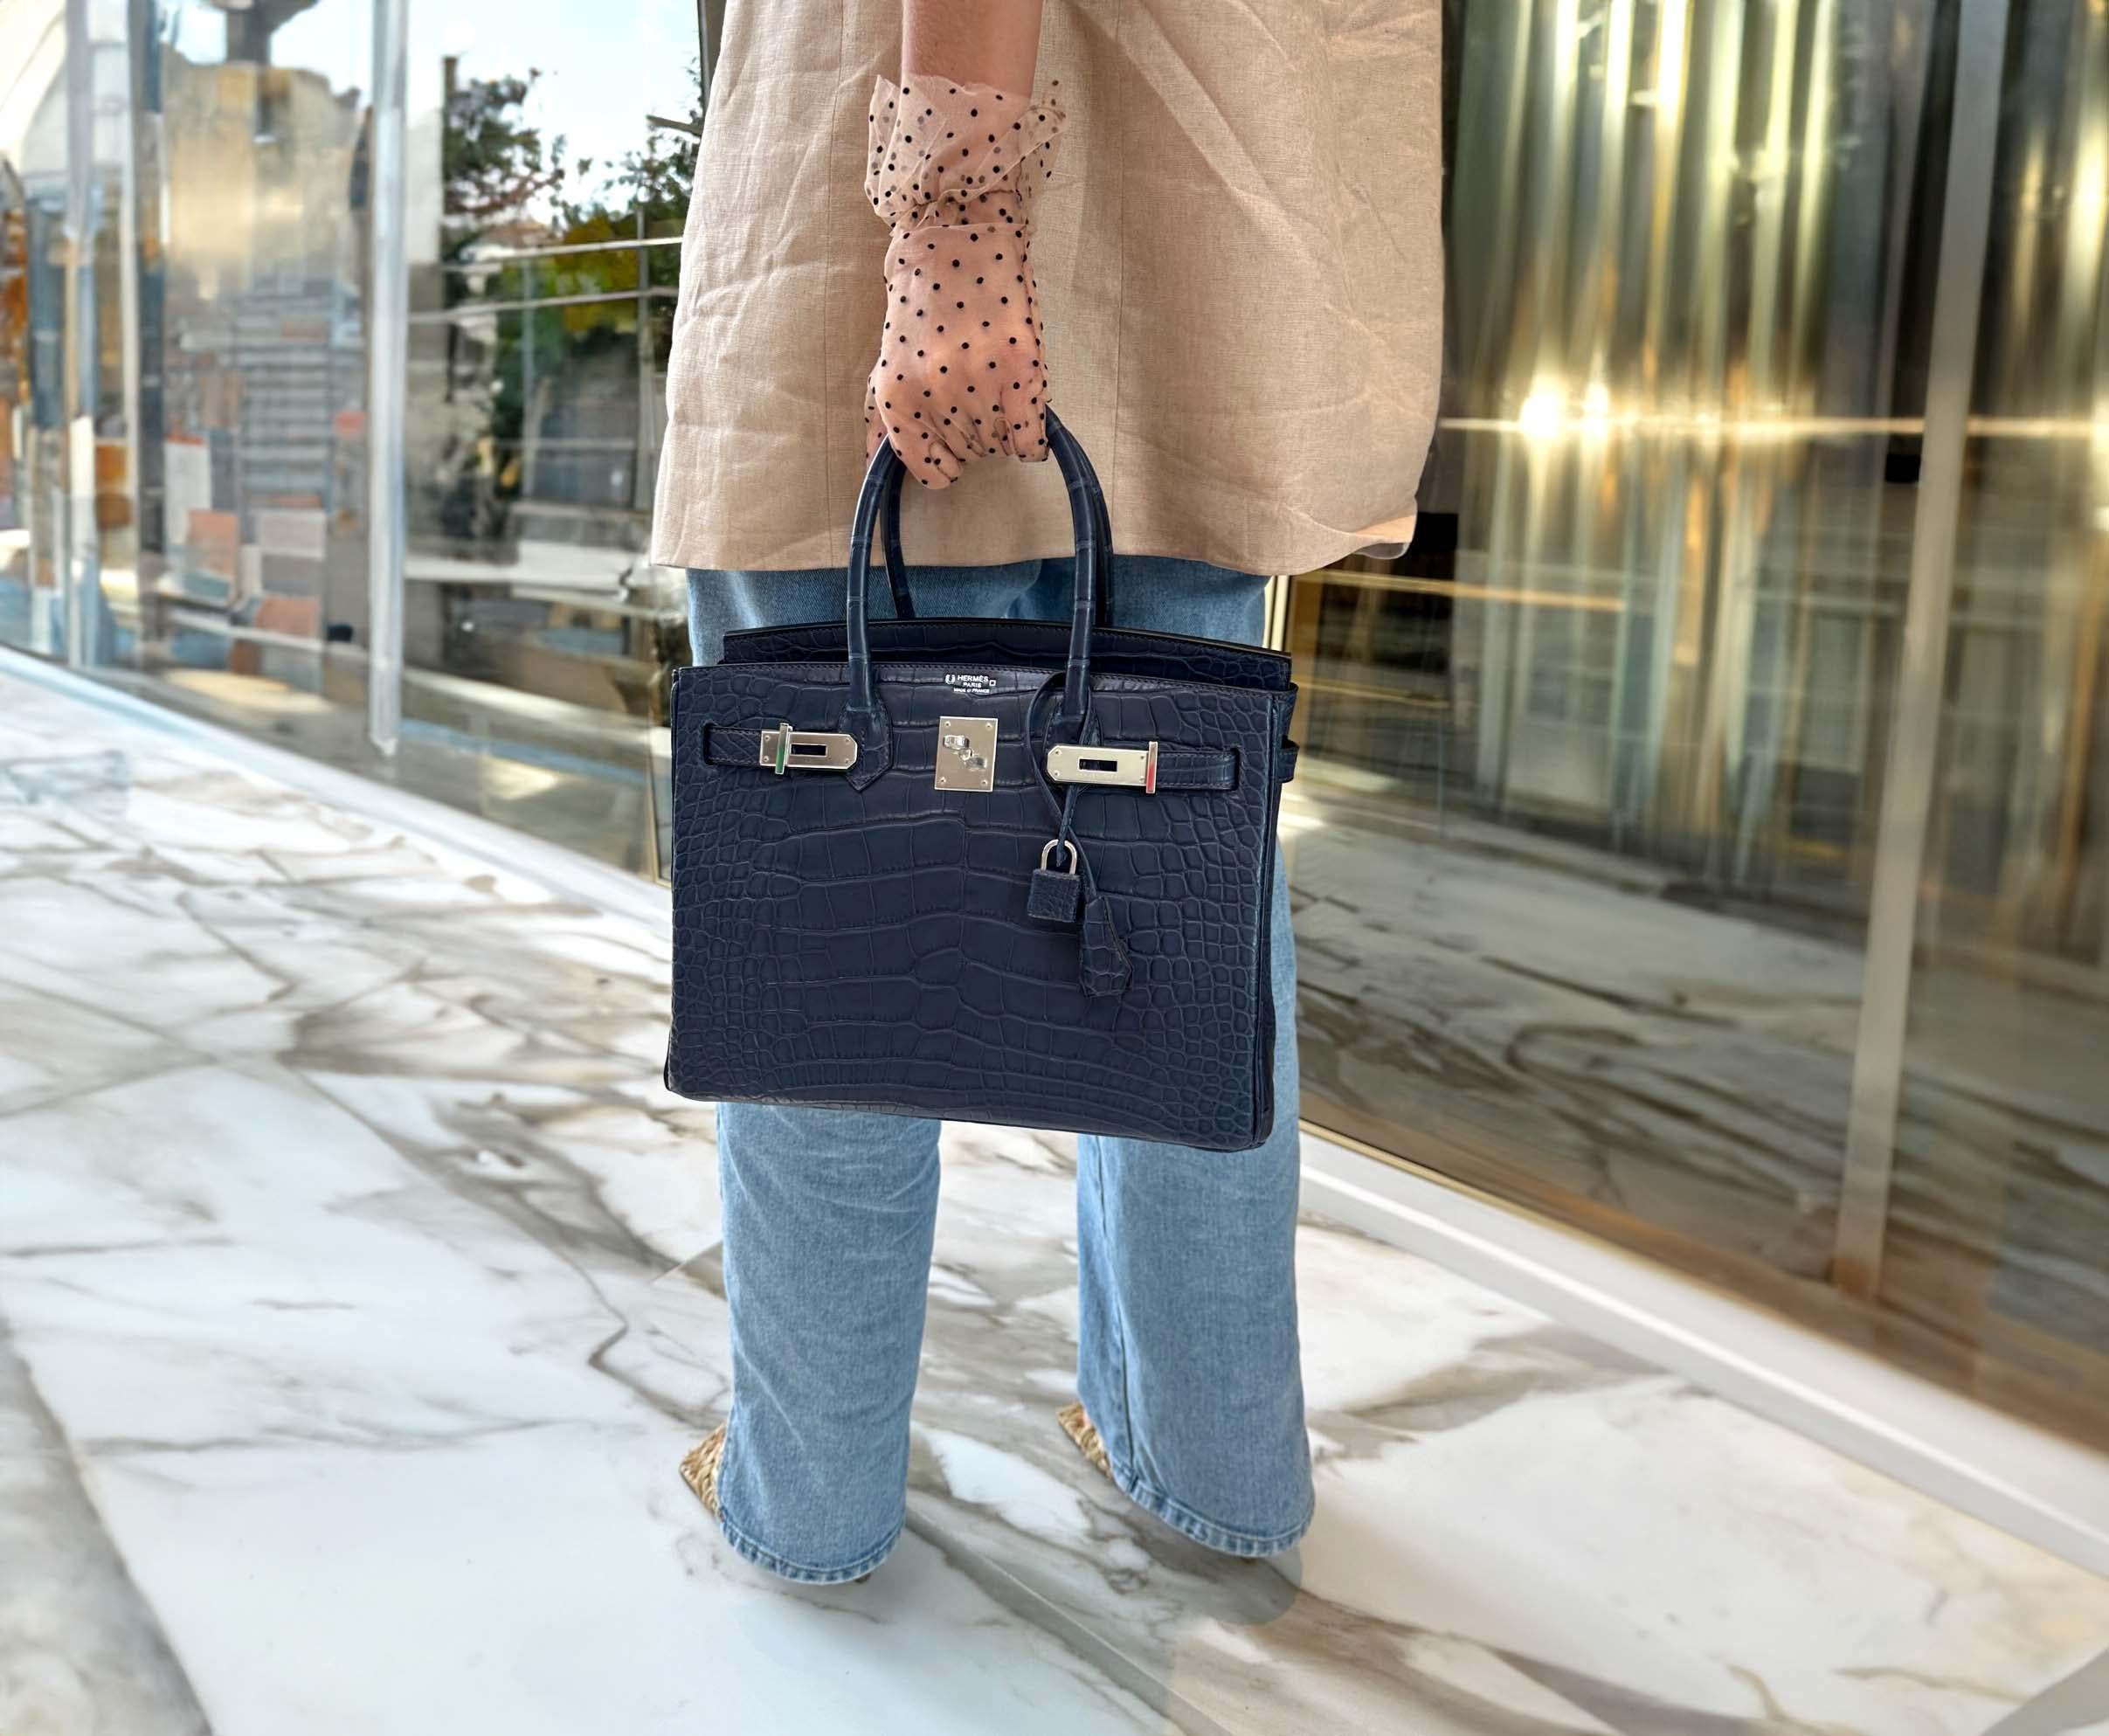 Hermès HSS Birkin 30 Blue Marine Matte Alligator & Cassis Interior PHW

In the exalted realm of luxury, Hermès Special Orders, known as 'HSS' or HorseShoe Stamp, represent the pinnacle of craftsmanship and exclusivity. Offered only to an elite